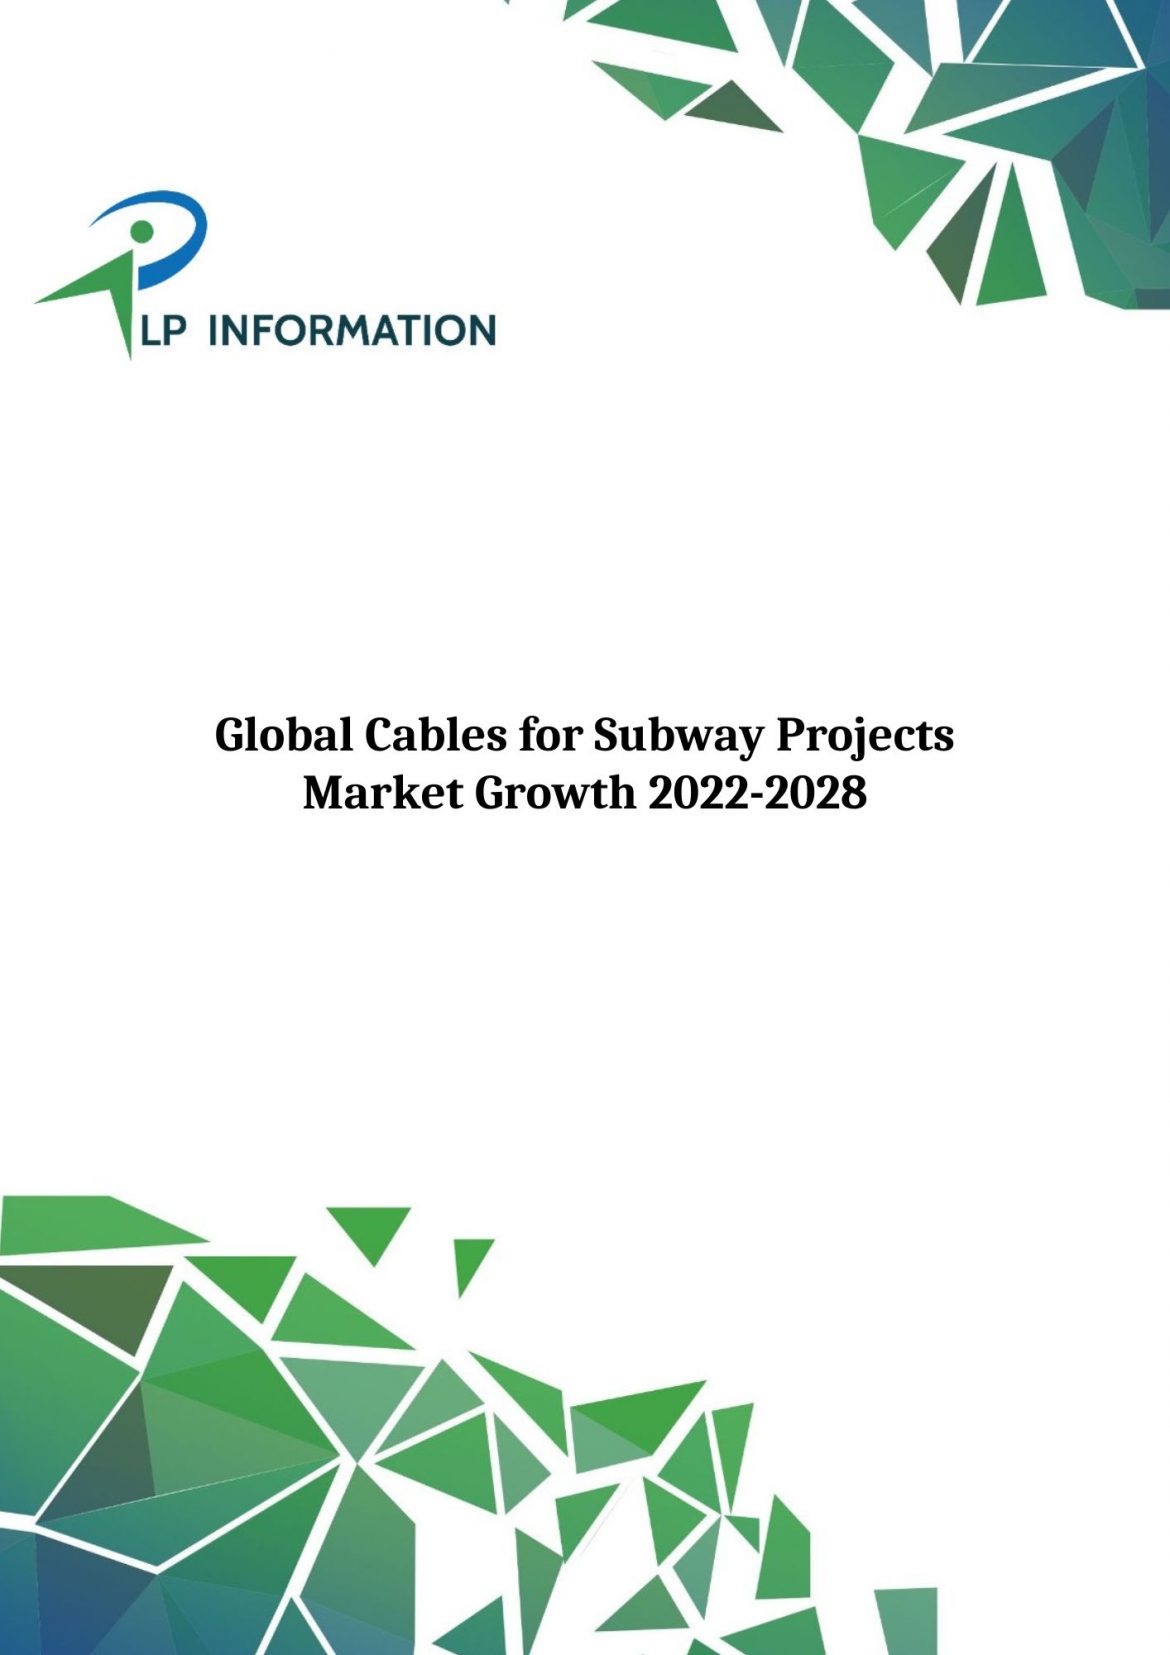 Global Cables for Subway Projects Market Growth 2022-2028